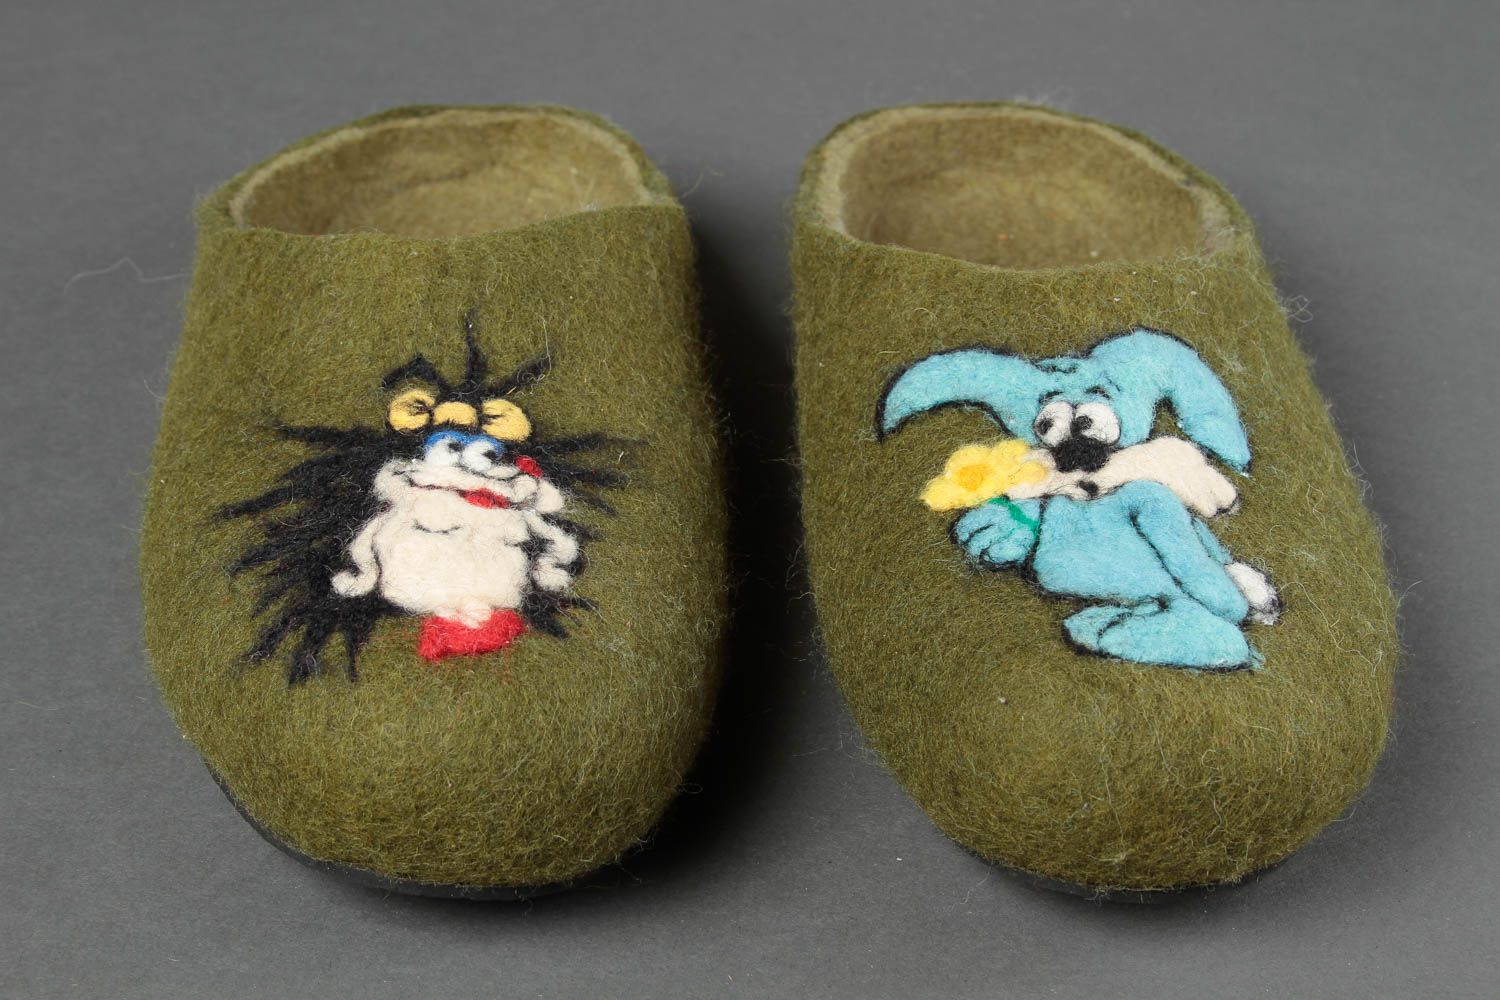 Handmade felted slippers home woolen slippers with animals stylish present photo 2